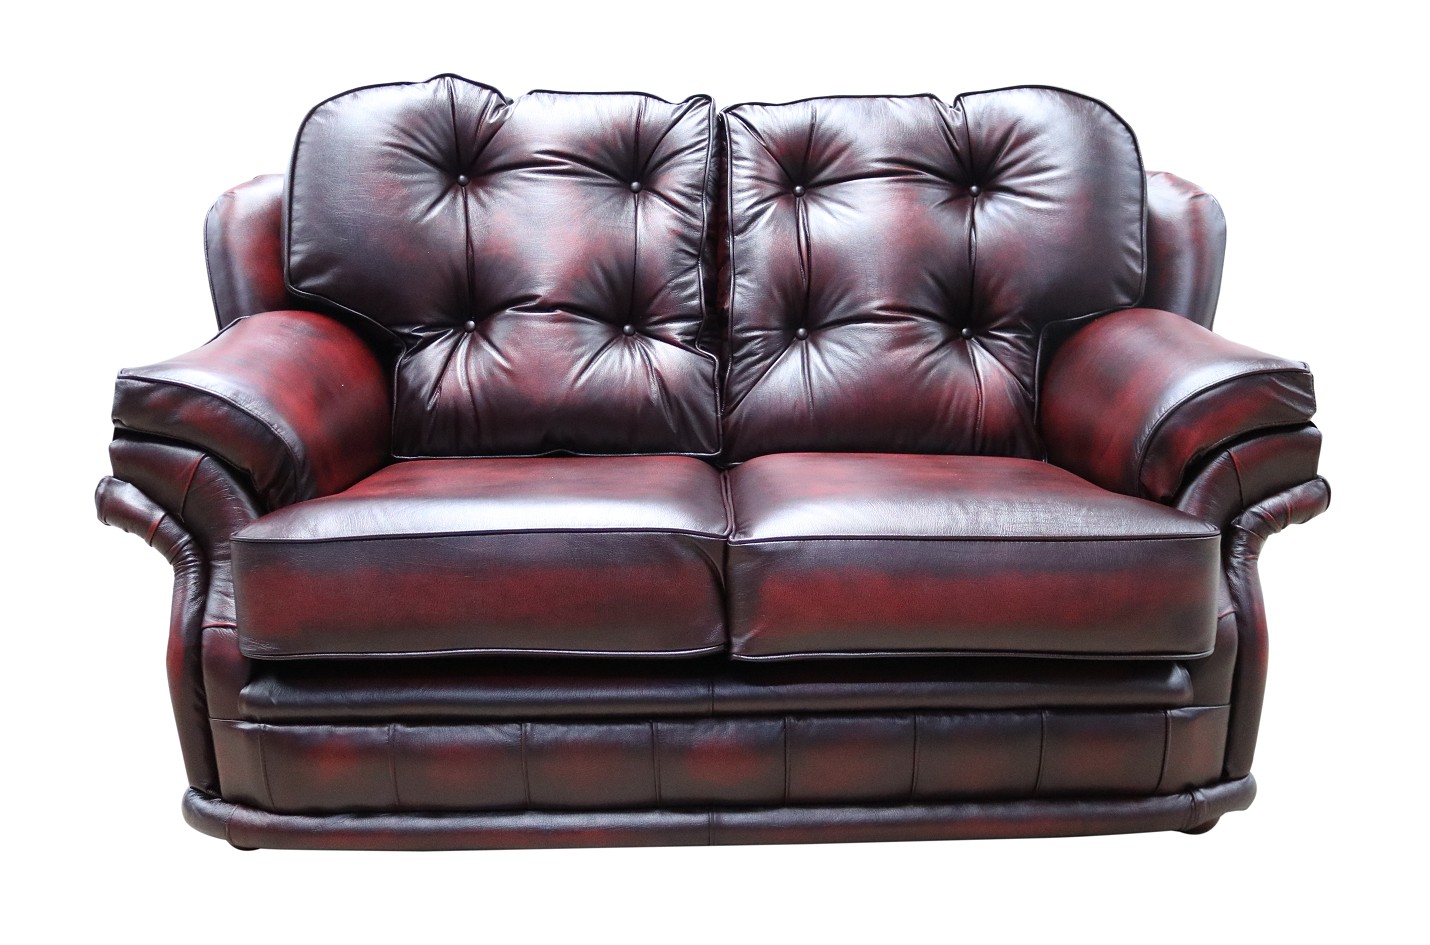 Product photograph of Chesterfield 2 Seater Antique Oxblood Red Leather Sofa Bespoke In Knightsbr Idge Style from Chesterfield Sofas